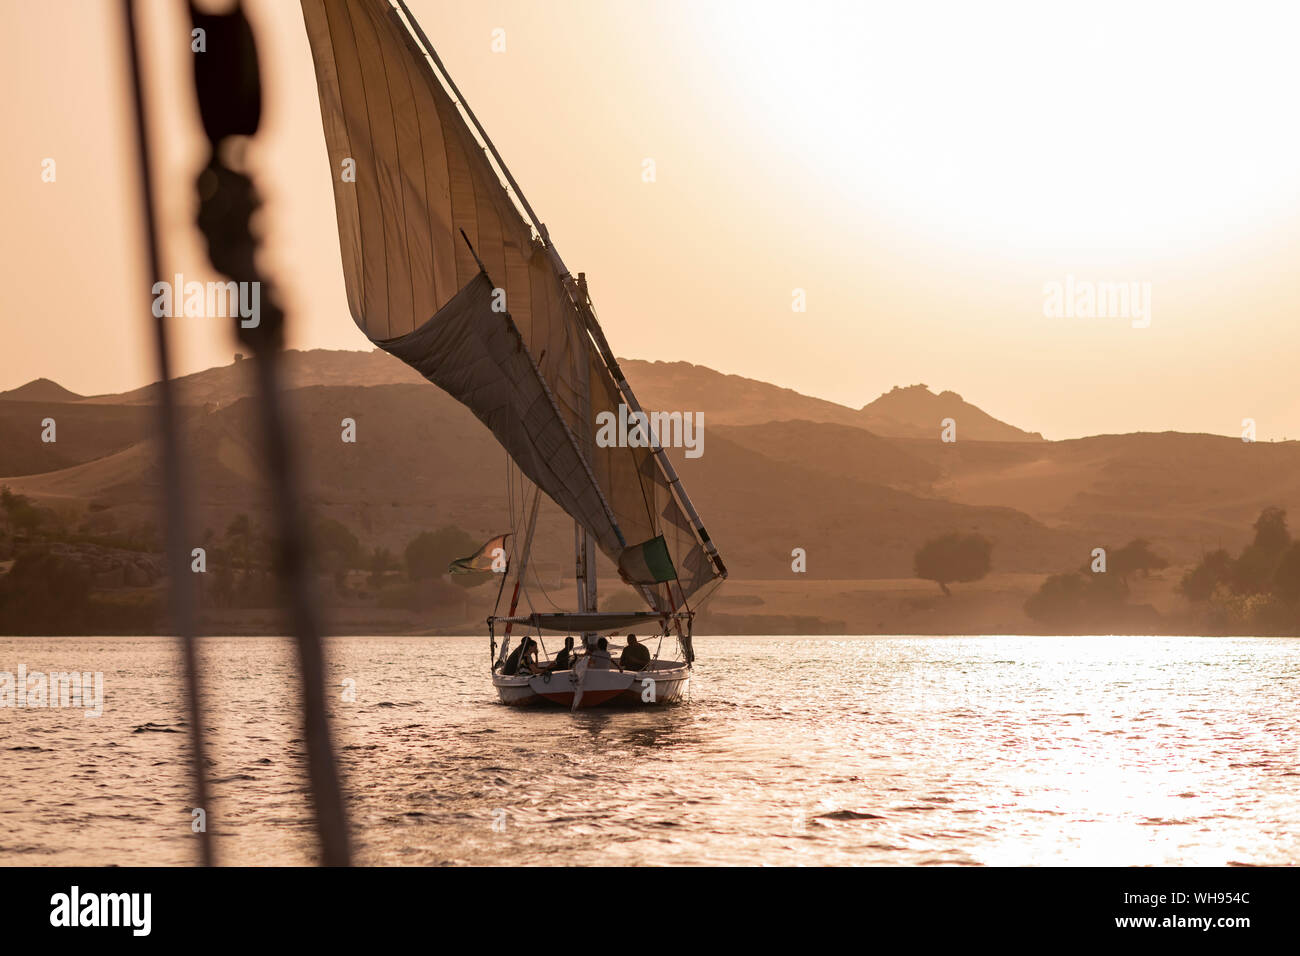 A traditional Felucca sailboat with wooden masts and cotton sails at sunset on the River Nile, Aswan, Egypt, North Africa, Africa Stock Photo